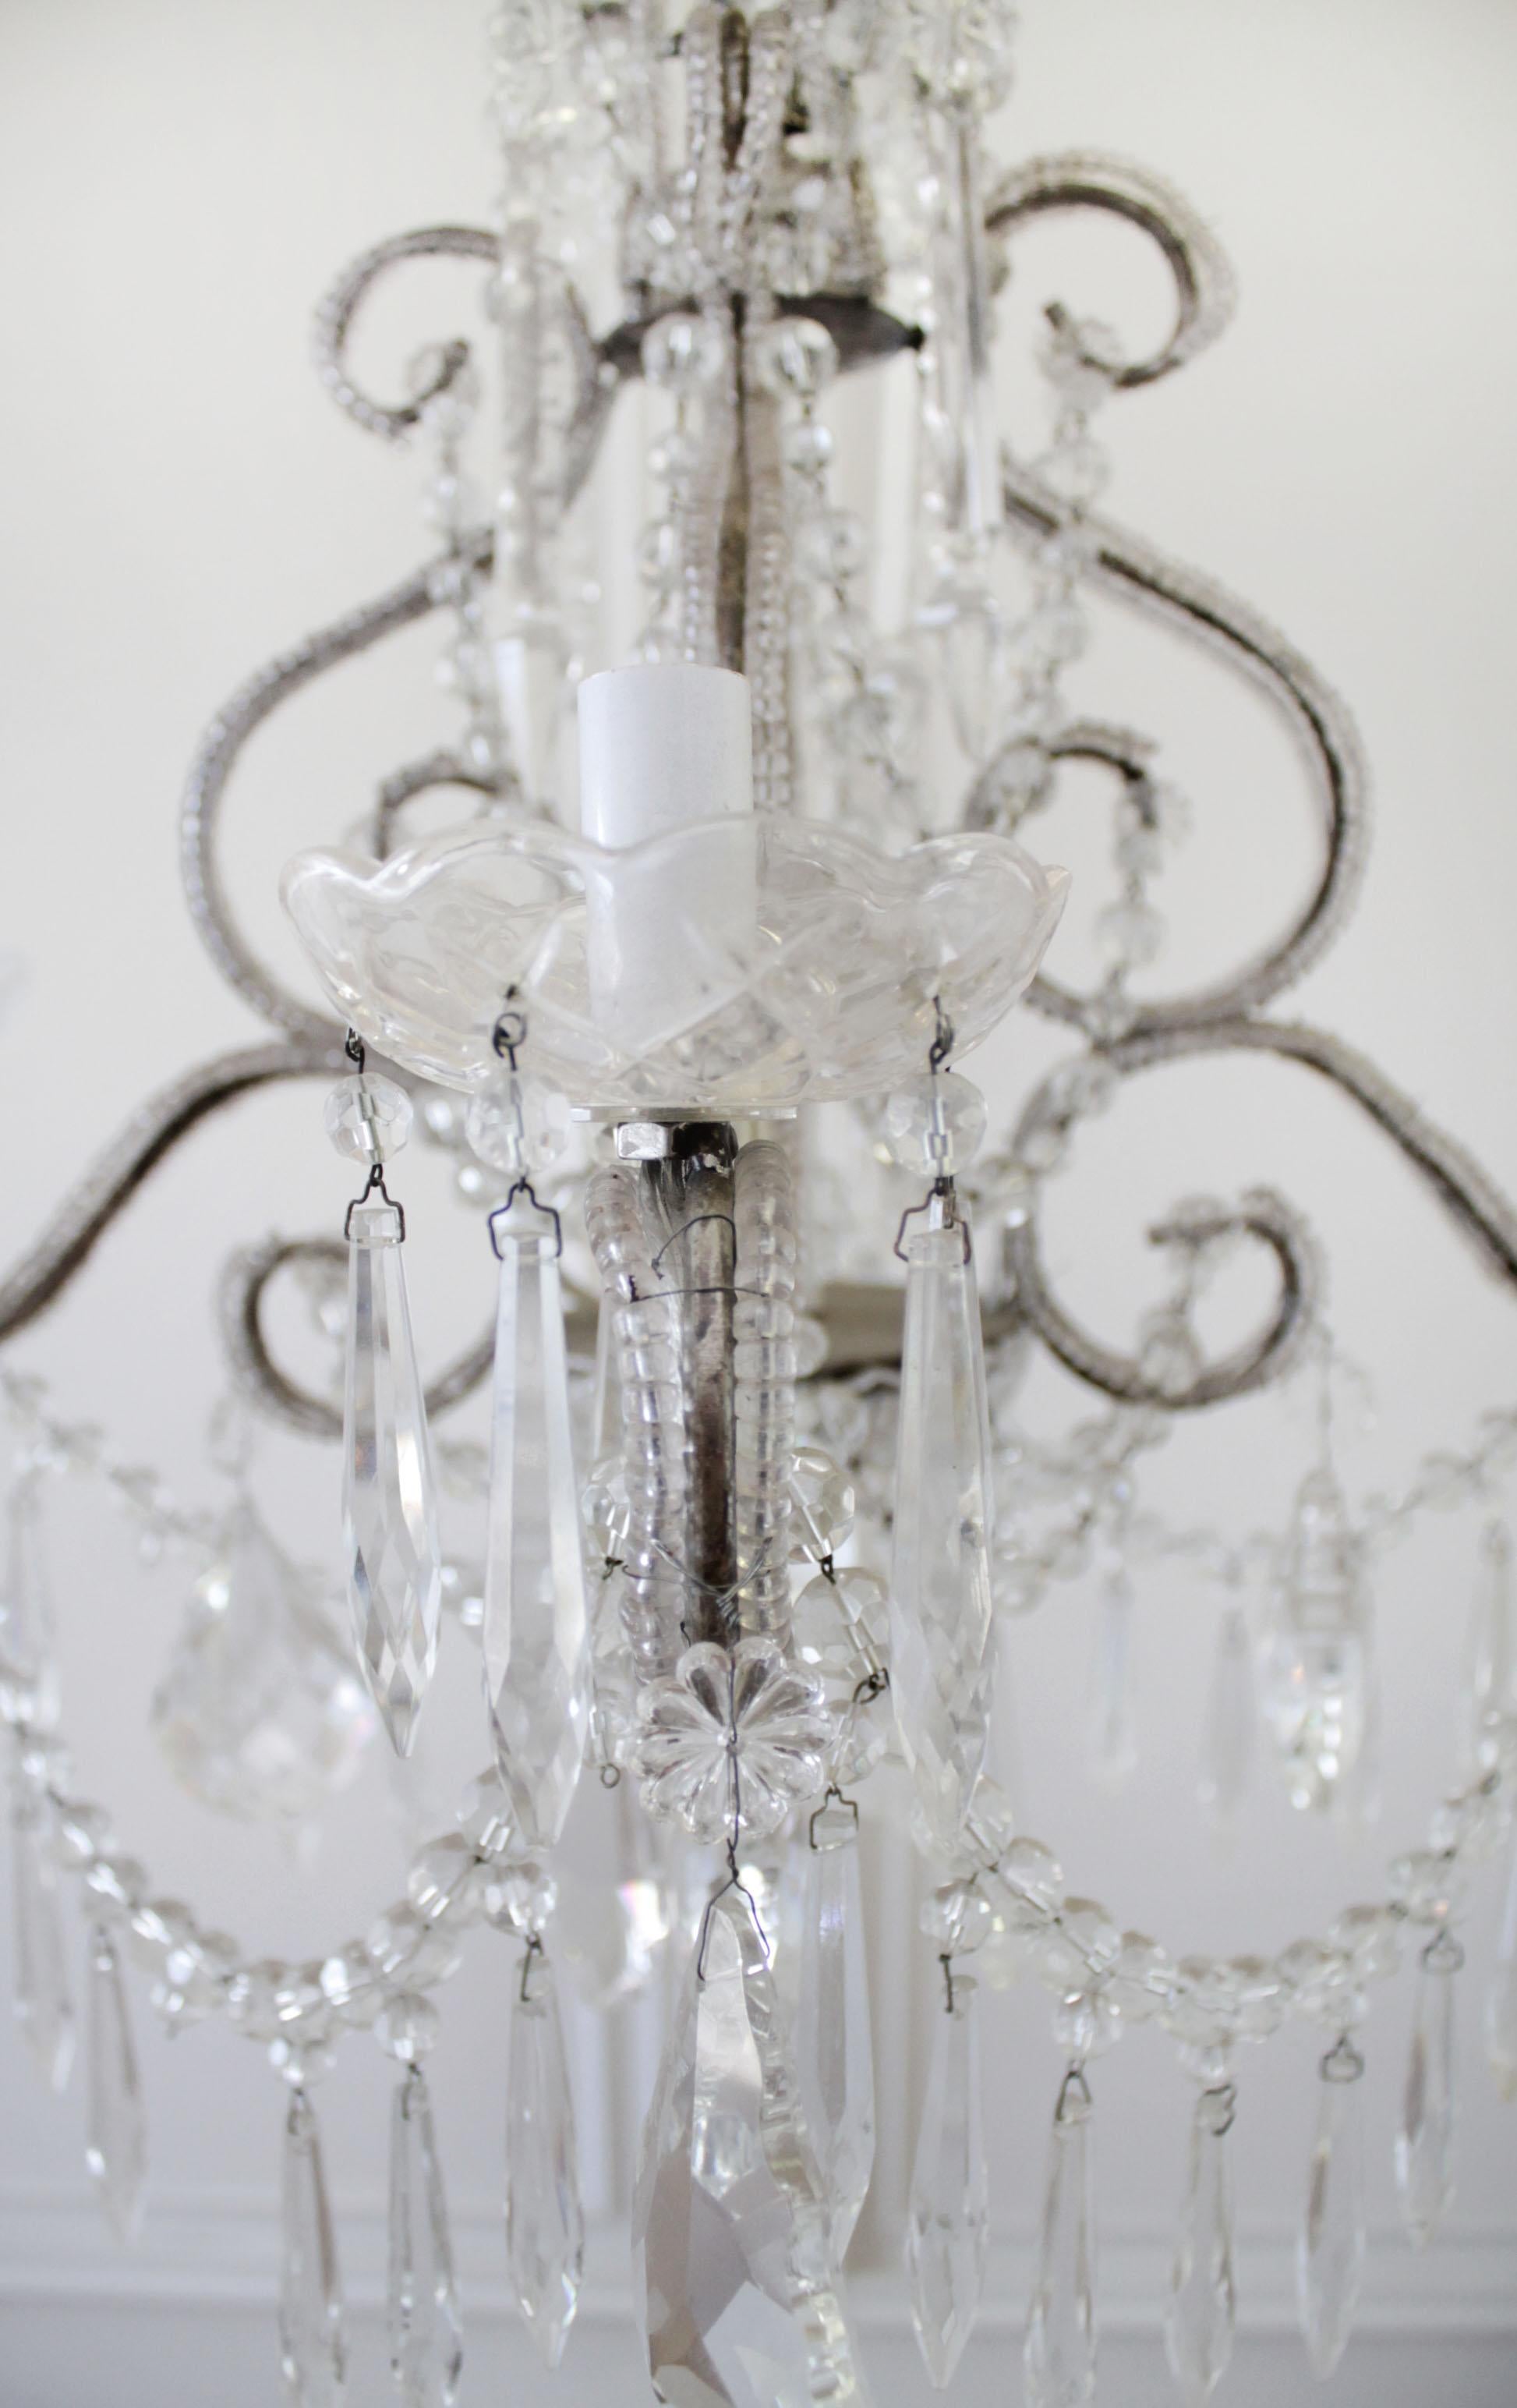 Petite beaded arm silver finish chandelier, with glass bobeche cups, and dainty rosettes. Crystal spear type crystals suspend from each garland adding a little extra sparkle.
Size: 22